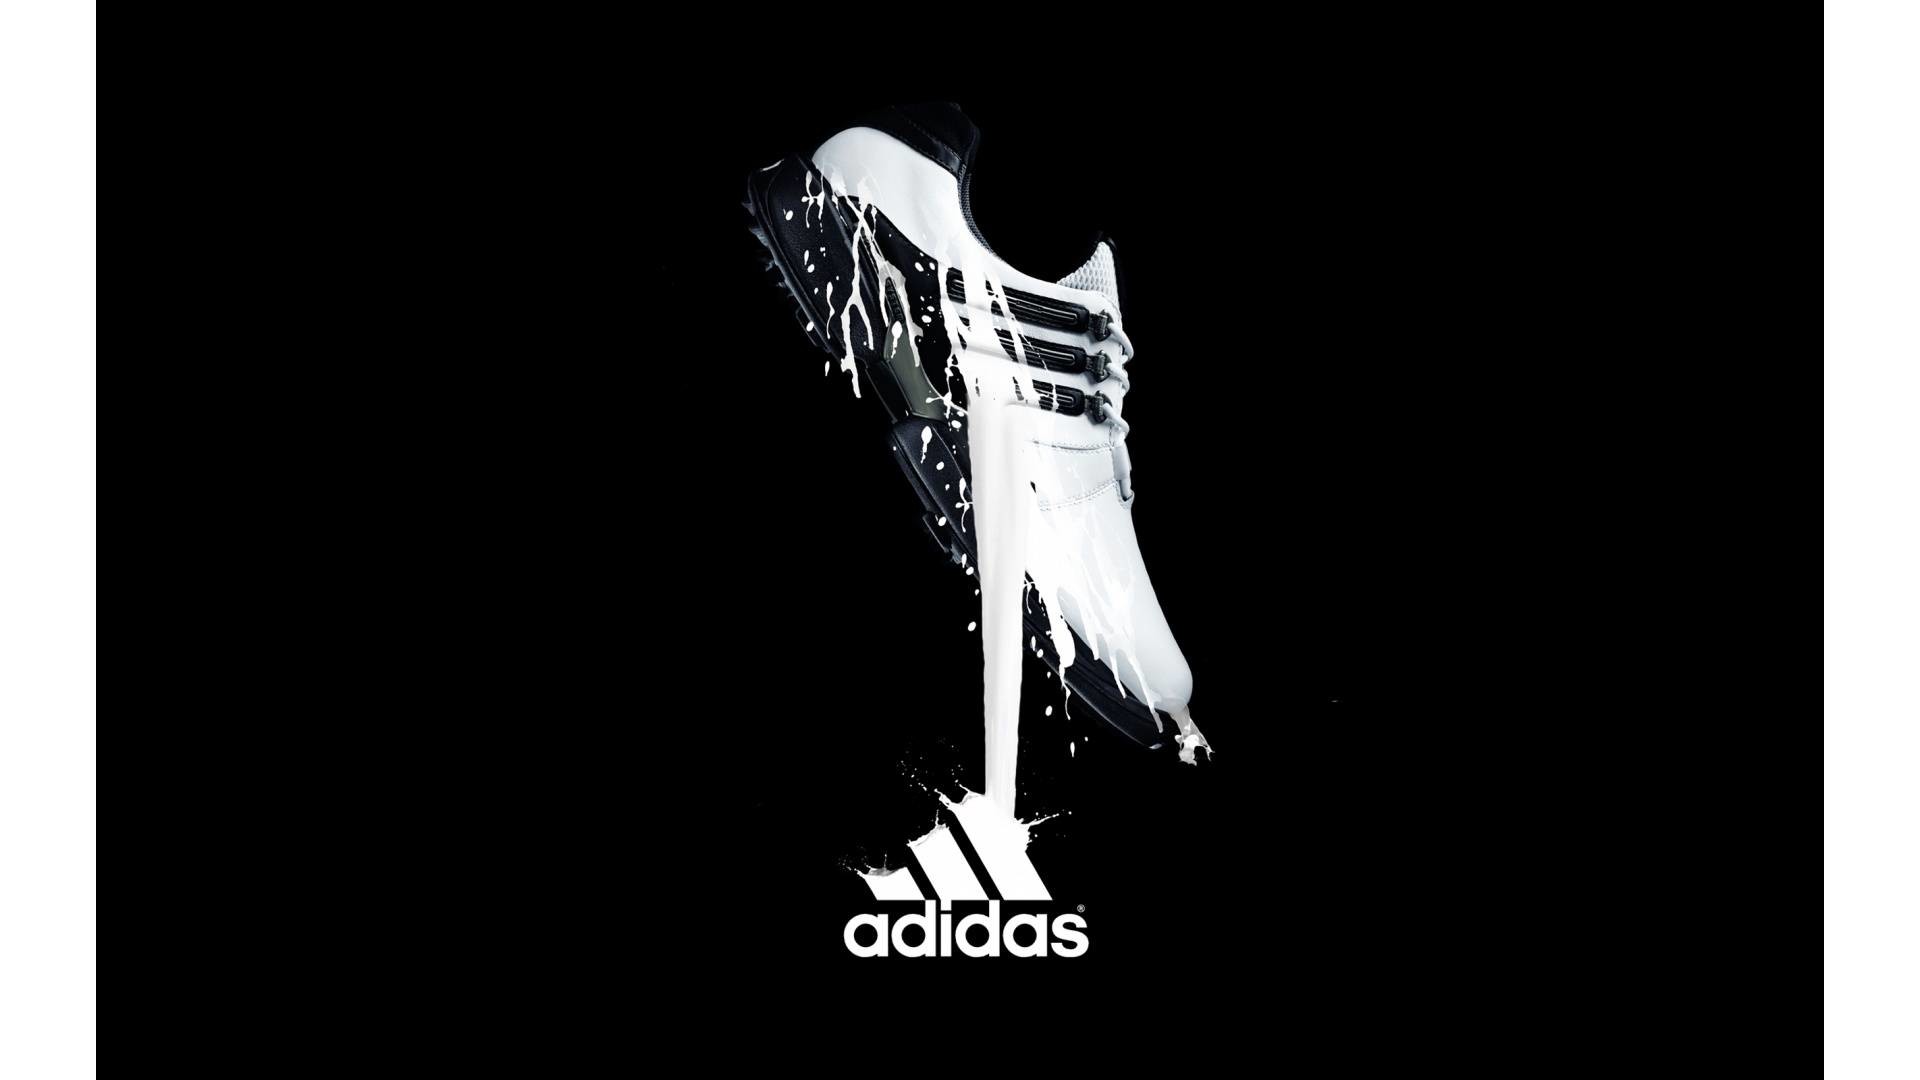 1920x1080 adidas shoes wallpaper hd images